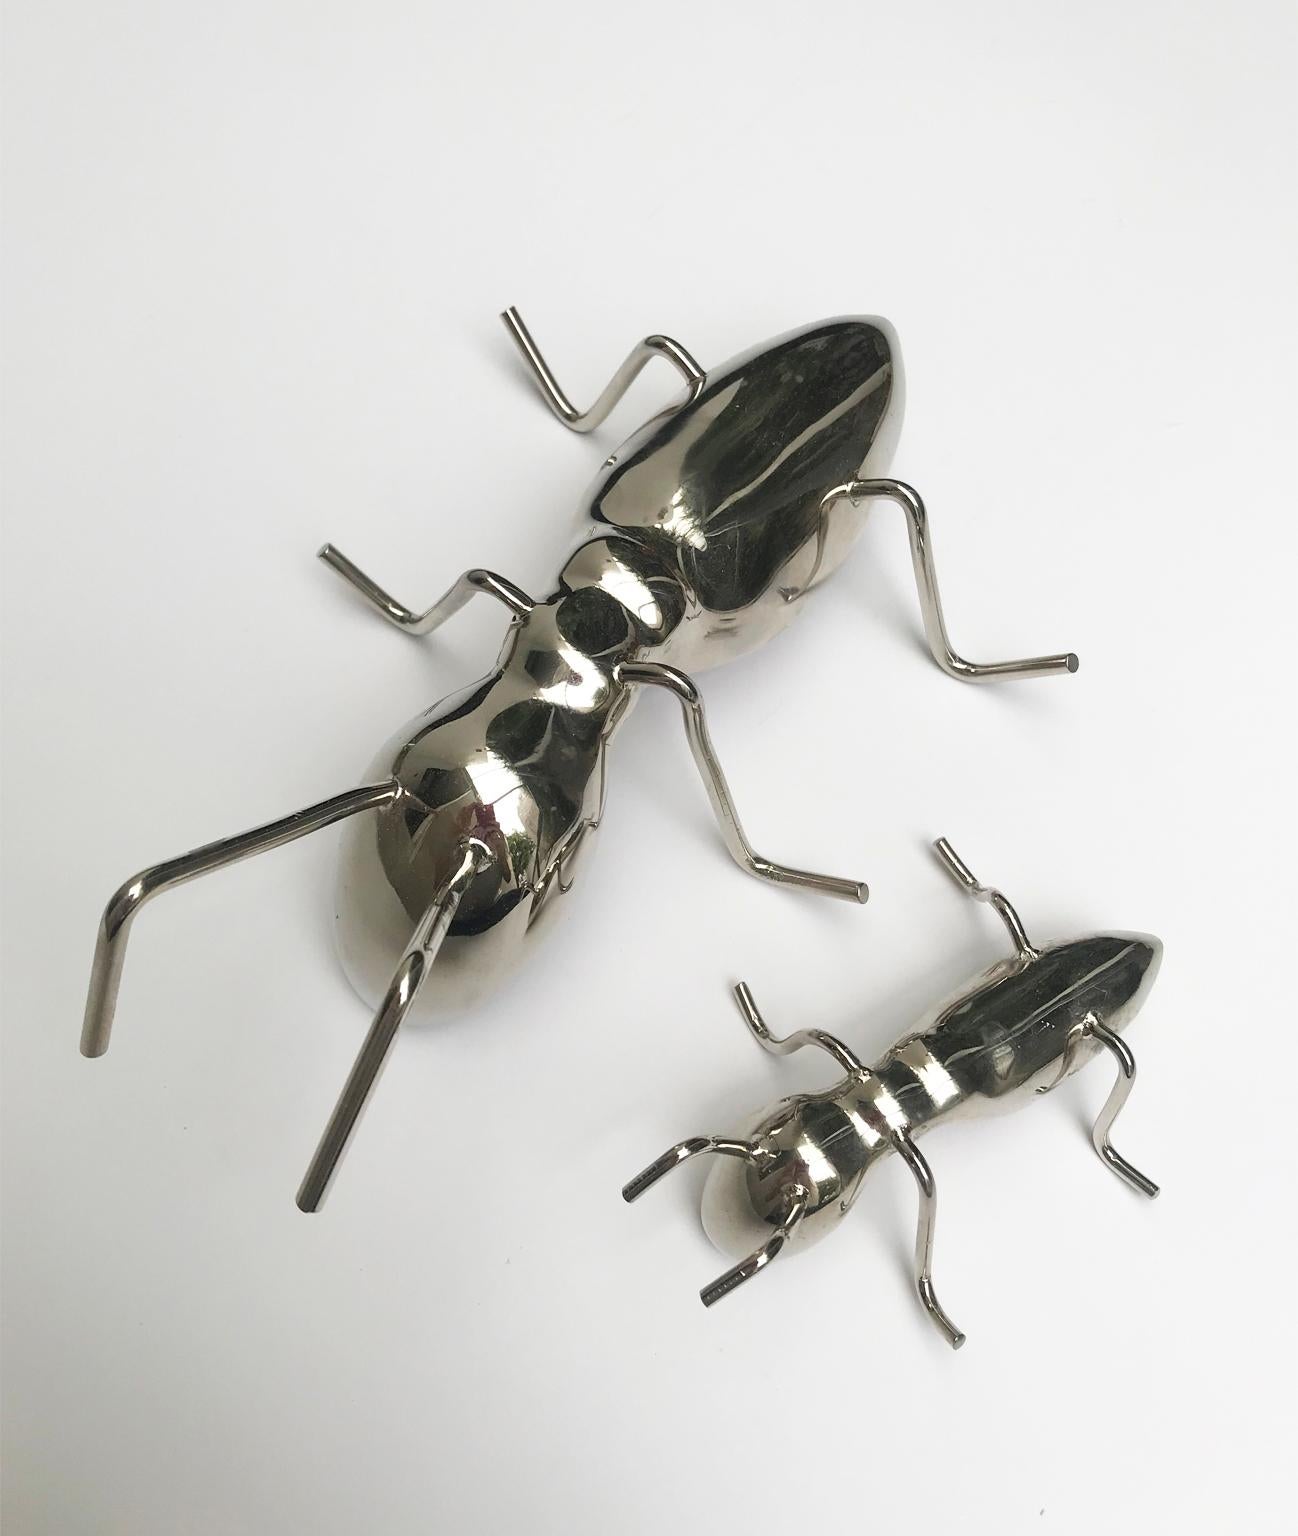 Ideal for decoration objects upon, tables, counters, books, bookshelves and side tables. These are two ant sculptures hand made with solid bronze. In total they weigh 2.5 kg and have a shinny white finish. The two pieces come together big (20 cm)